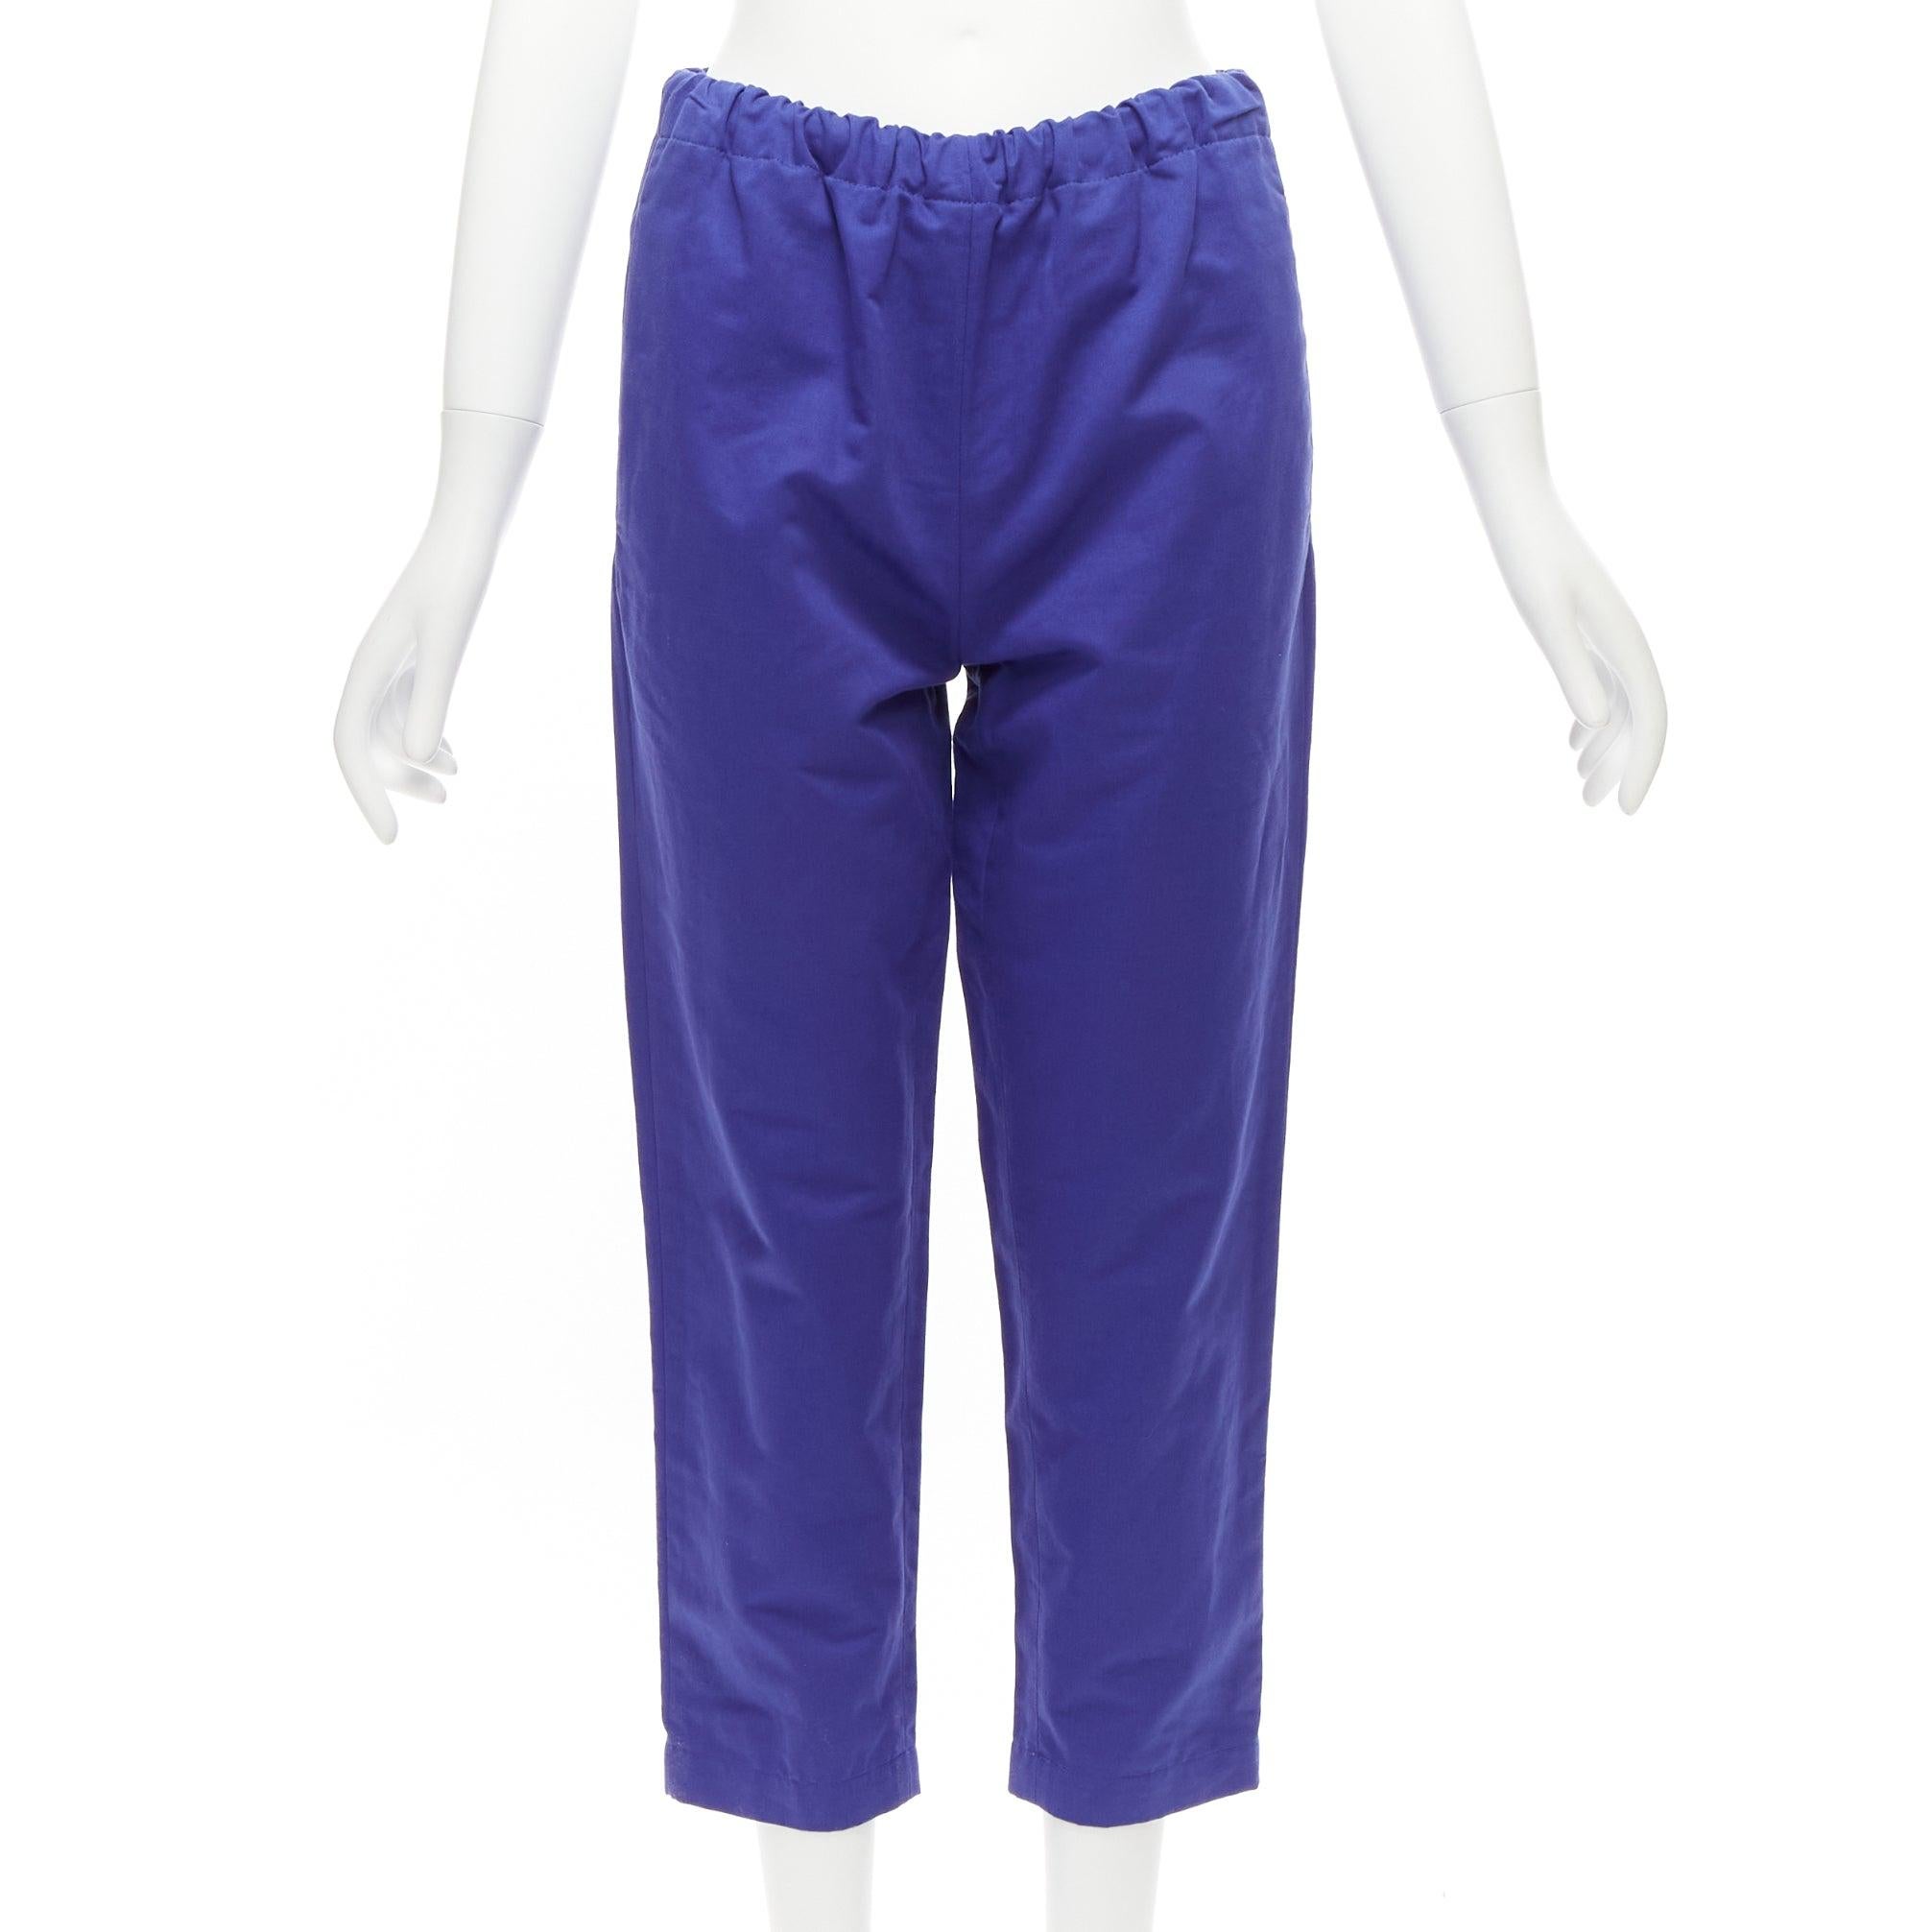 MARNI cobalt blue cotton linen minimalistic drawstring cropped pants
Reference: CELG/A00258
Brand: Marni
Material: Cotton, Linen
Color: Blue
Pattern: Solid
Closure: Elasticated
Made in: Italy

CONDITION:
Condition: Excellent, this item was pre-owned